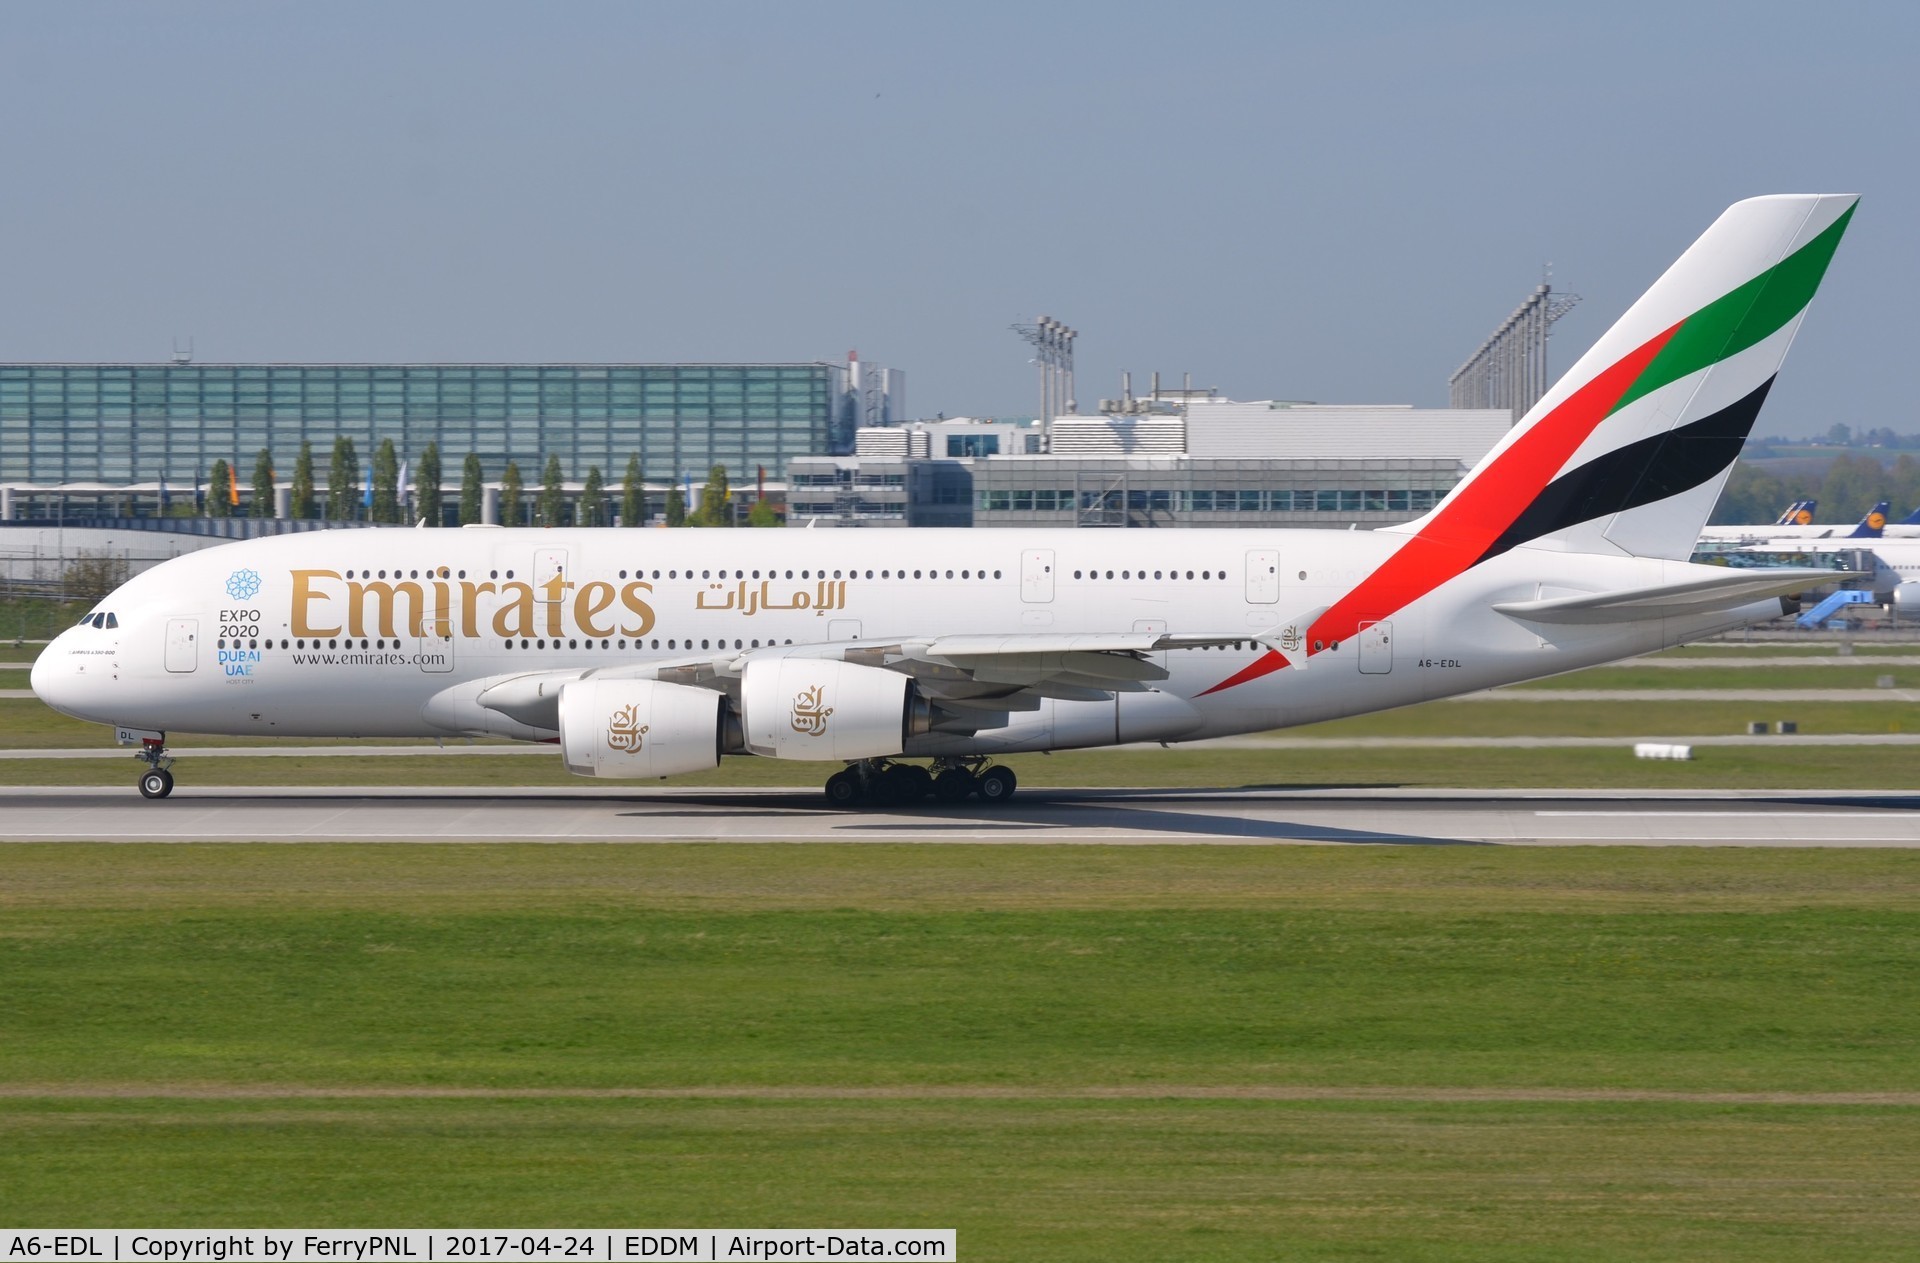 A6-EDL, 2010 Airbus A380-861 C/N 046, Emirates A388 departing